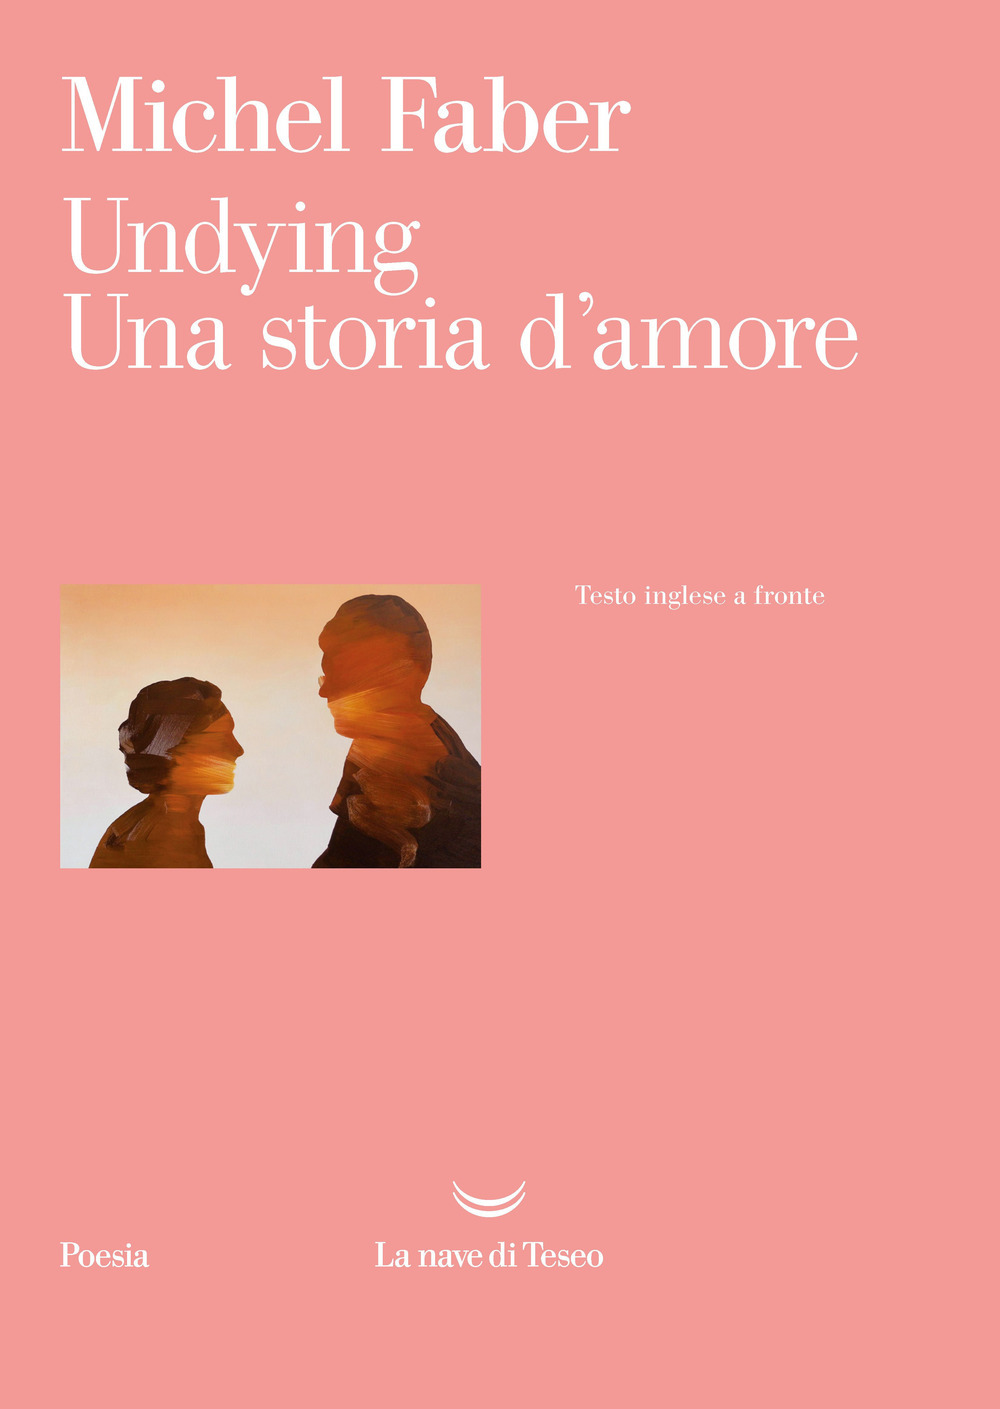 Michel Faber - Undying. Una storia d’amore